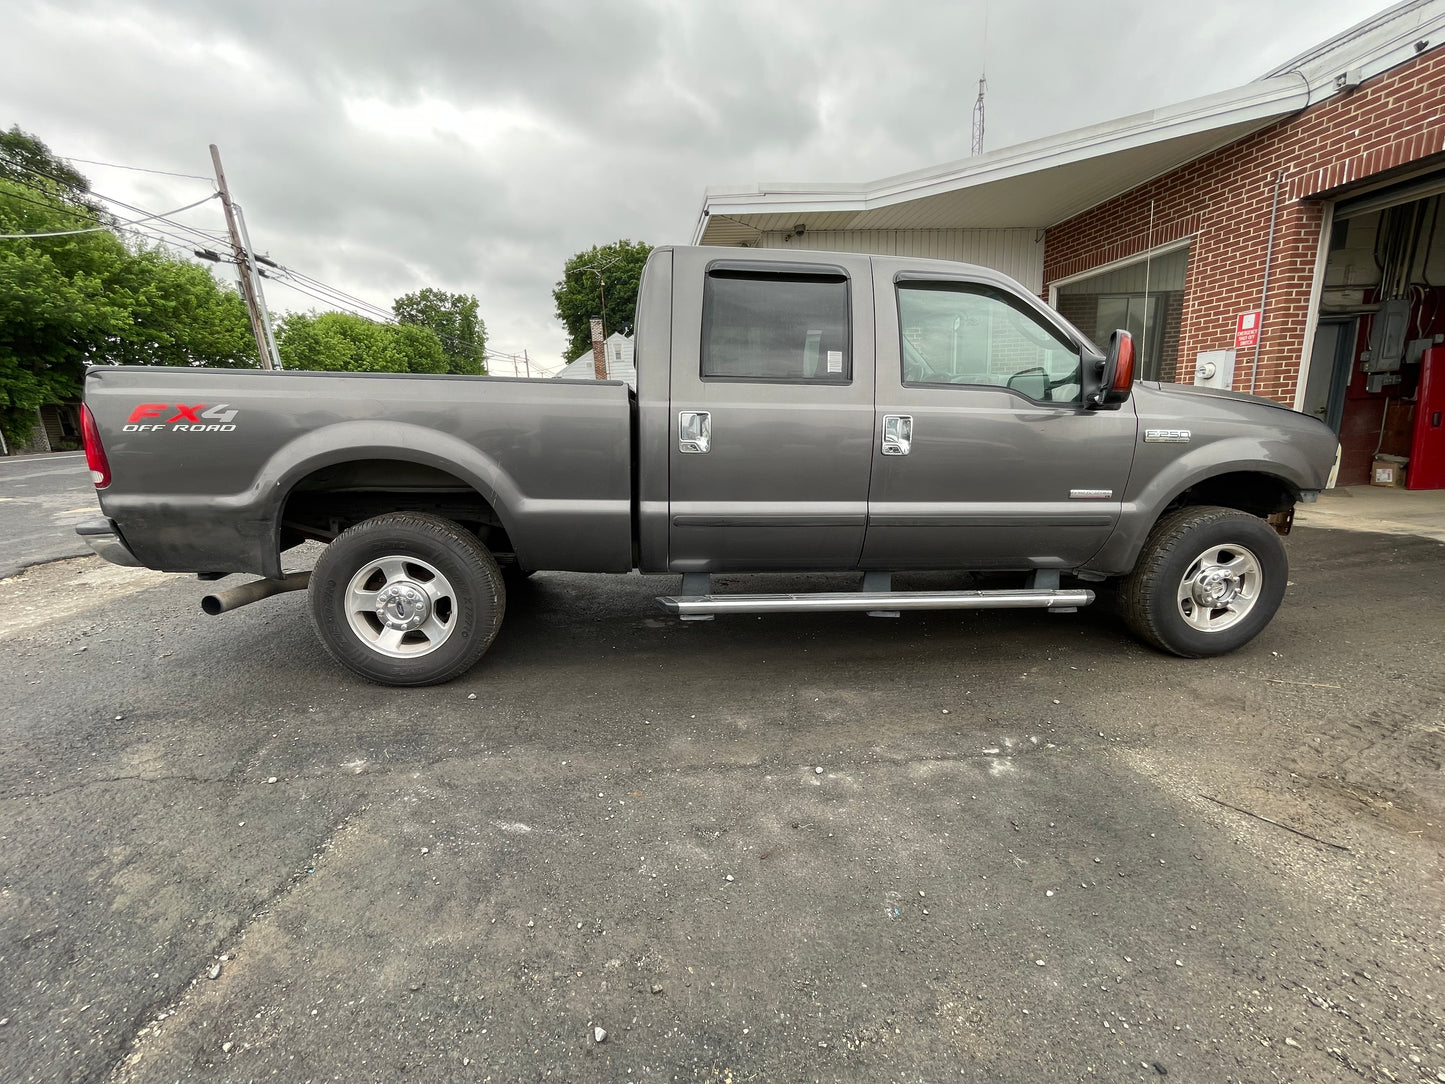 2005-2007 Superduty Crew Cab No Sunroof SOLD STRIPPED